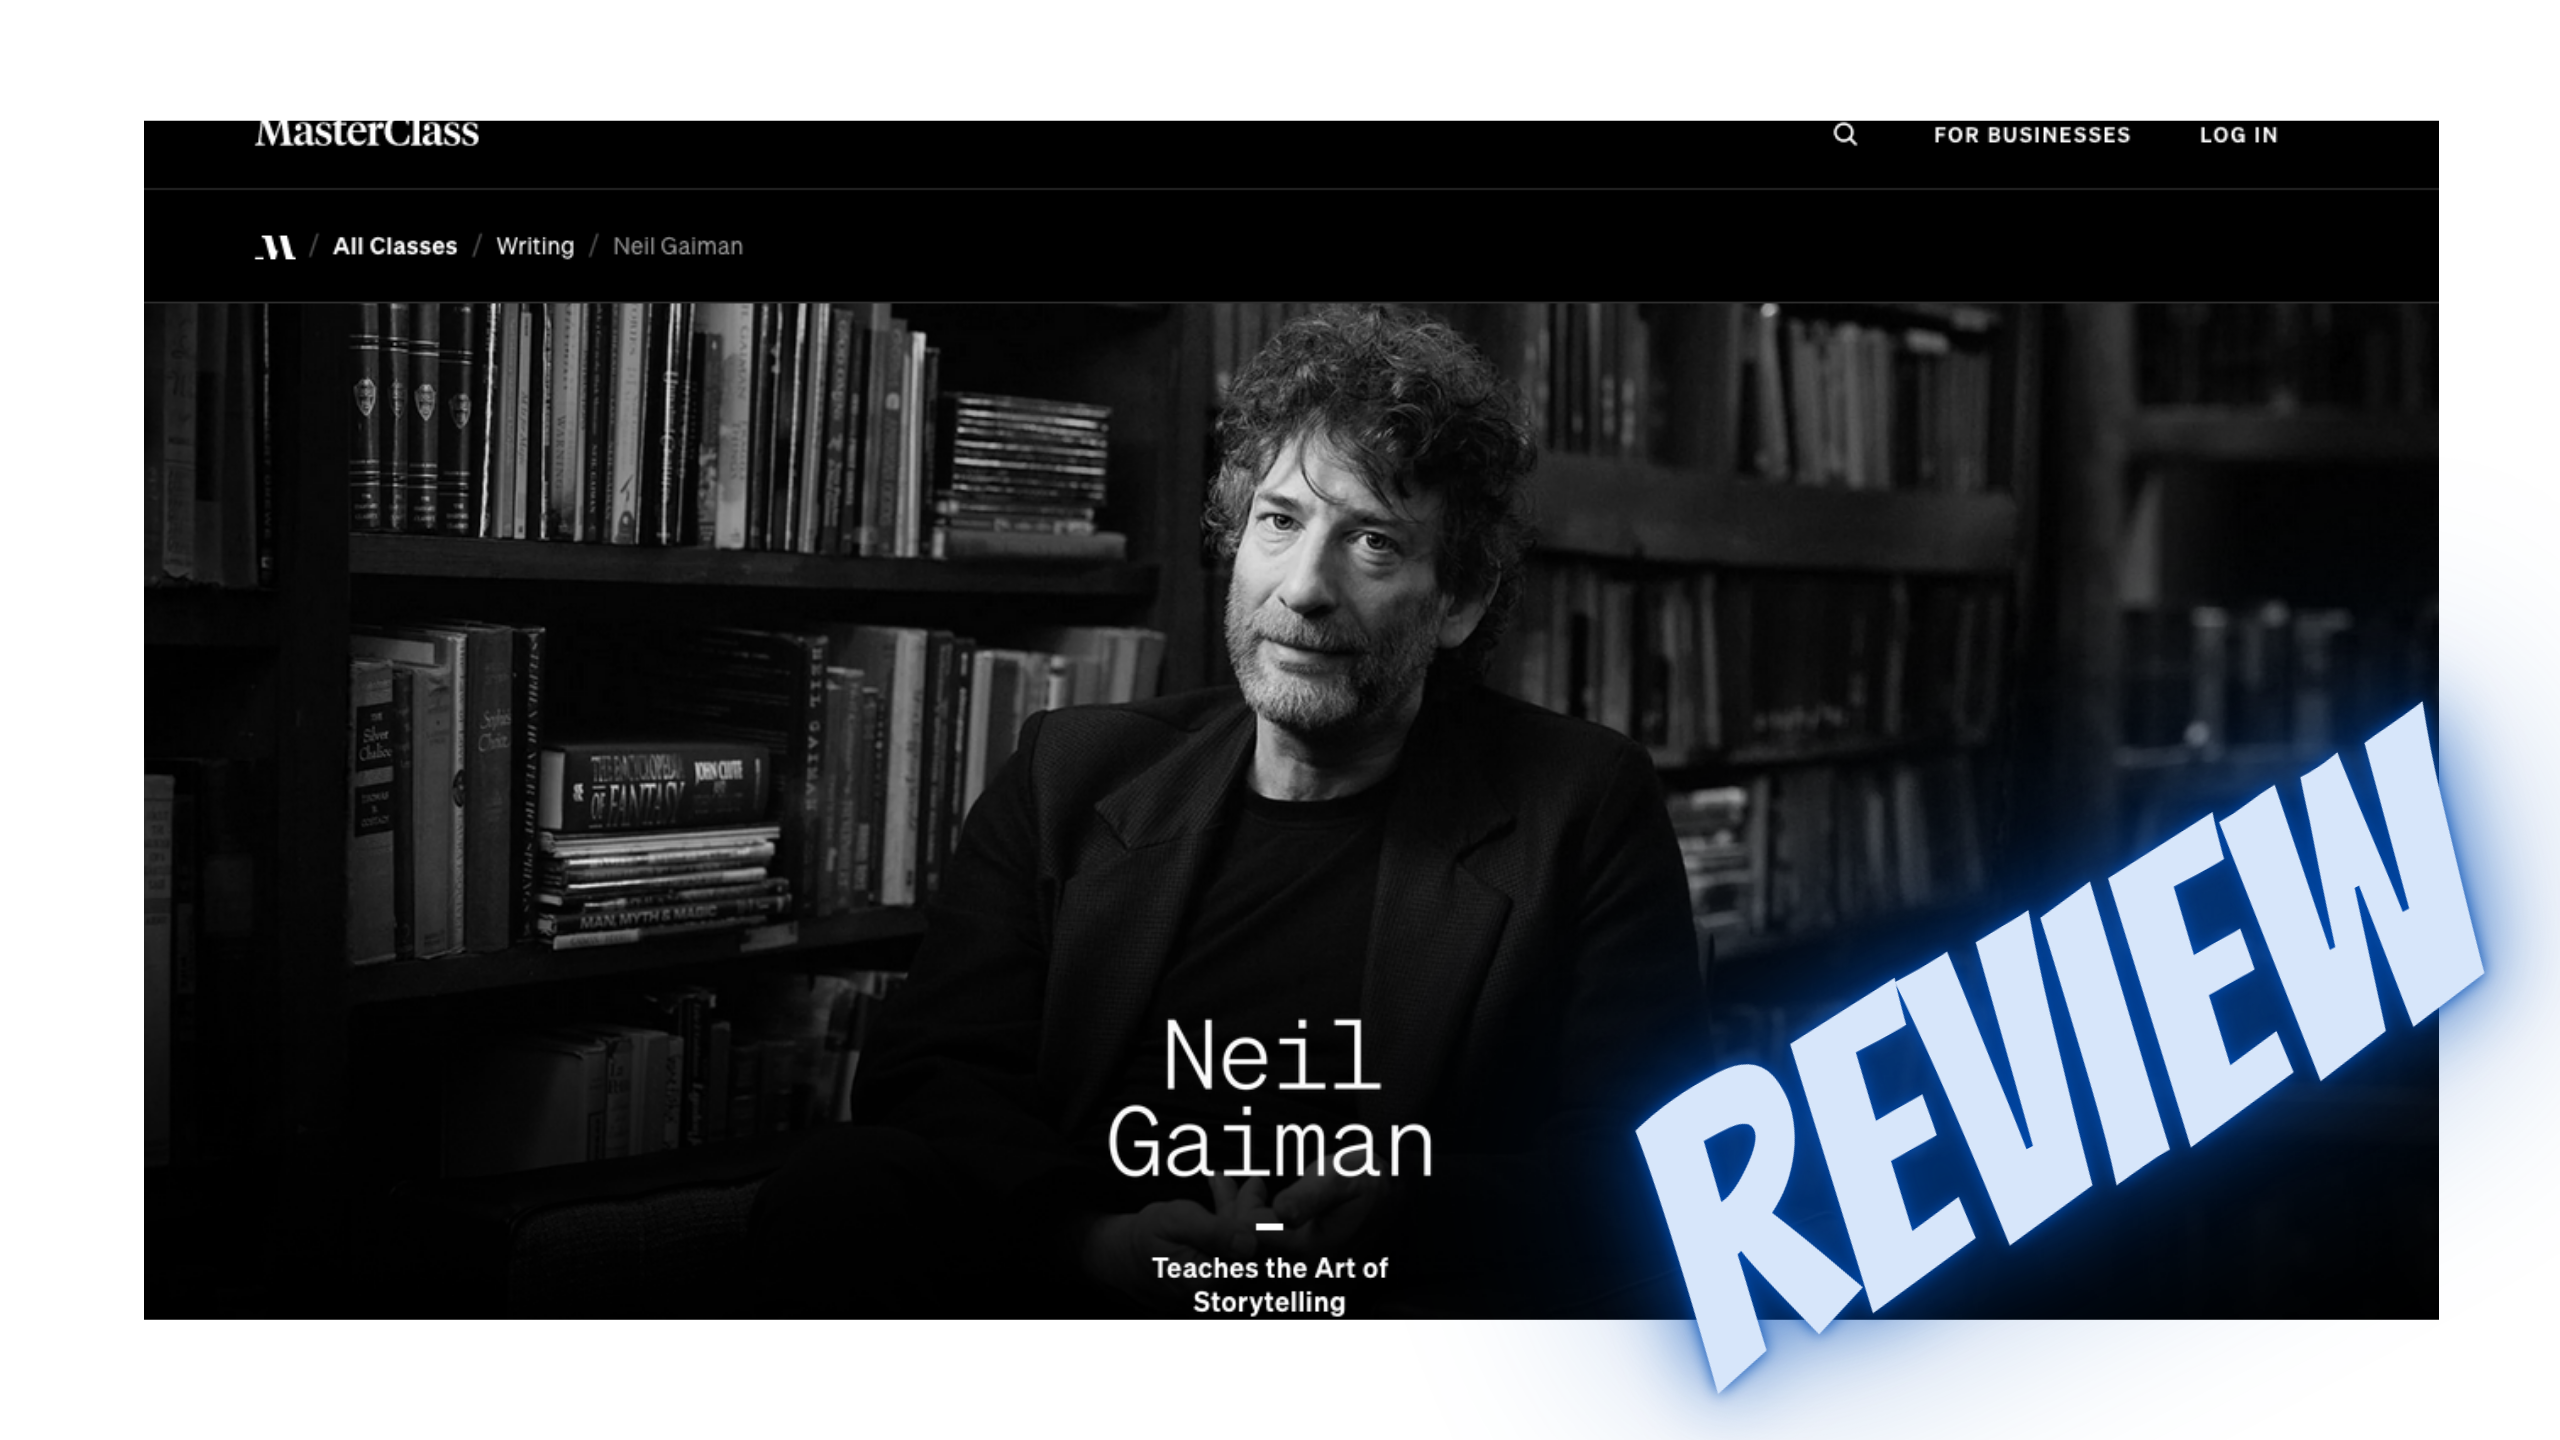 Neil Gaiman Masterclass Review 2023: The Writing Course For Short Story Fiction Writers (And Others!)